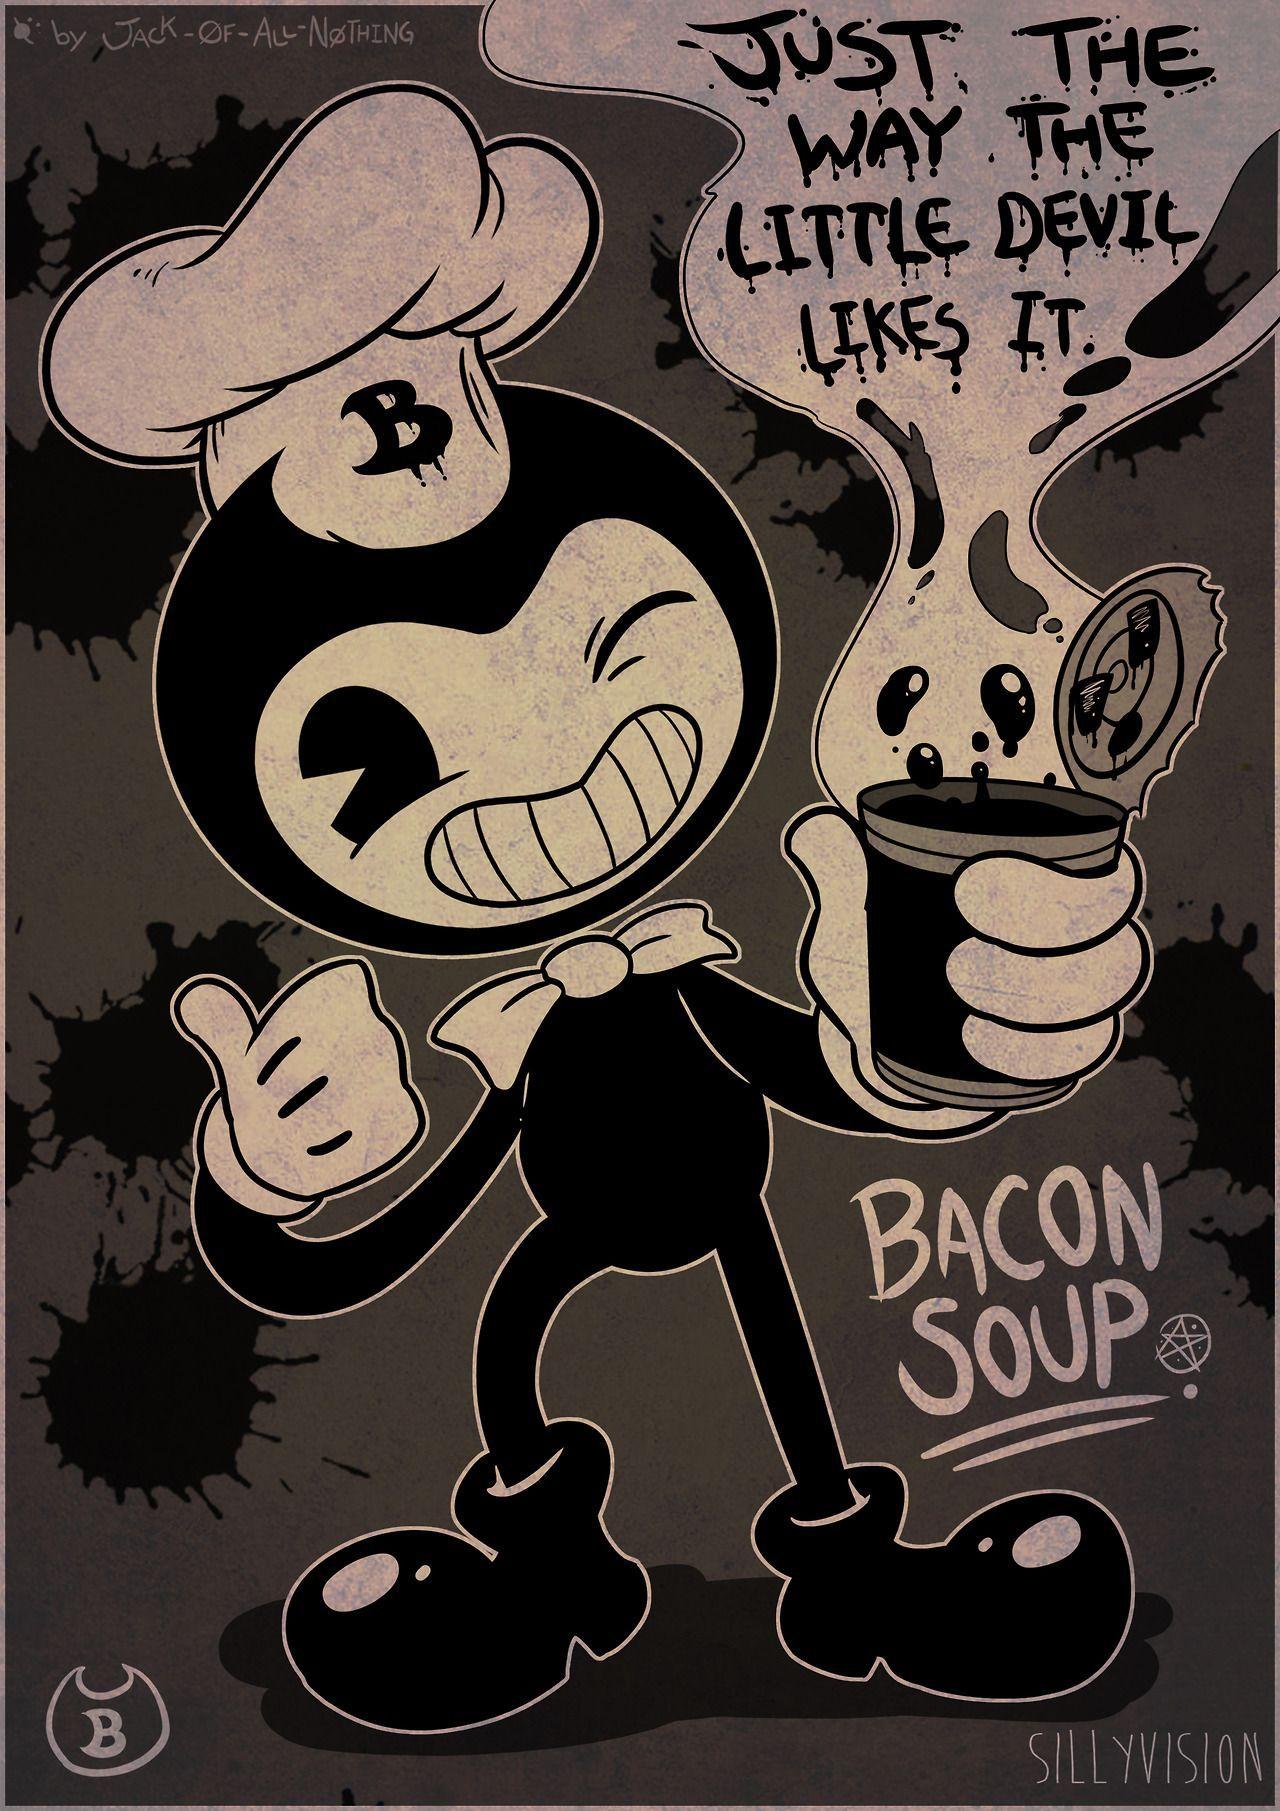 Bendy And The Ink Machine Wallpapers Top Free Bendy And